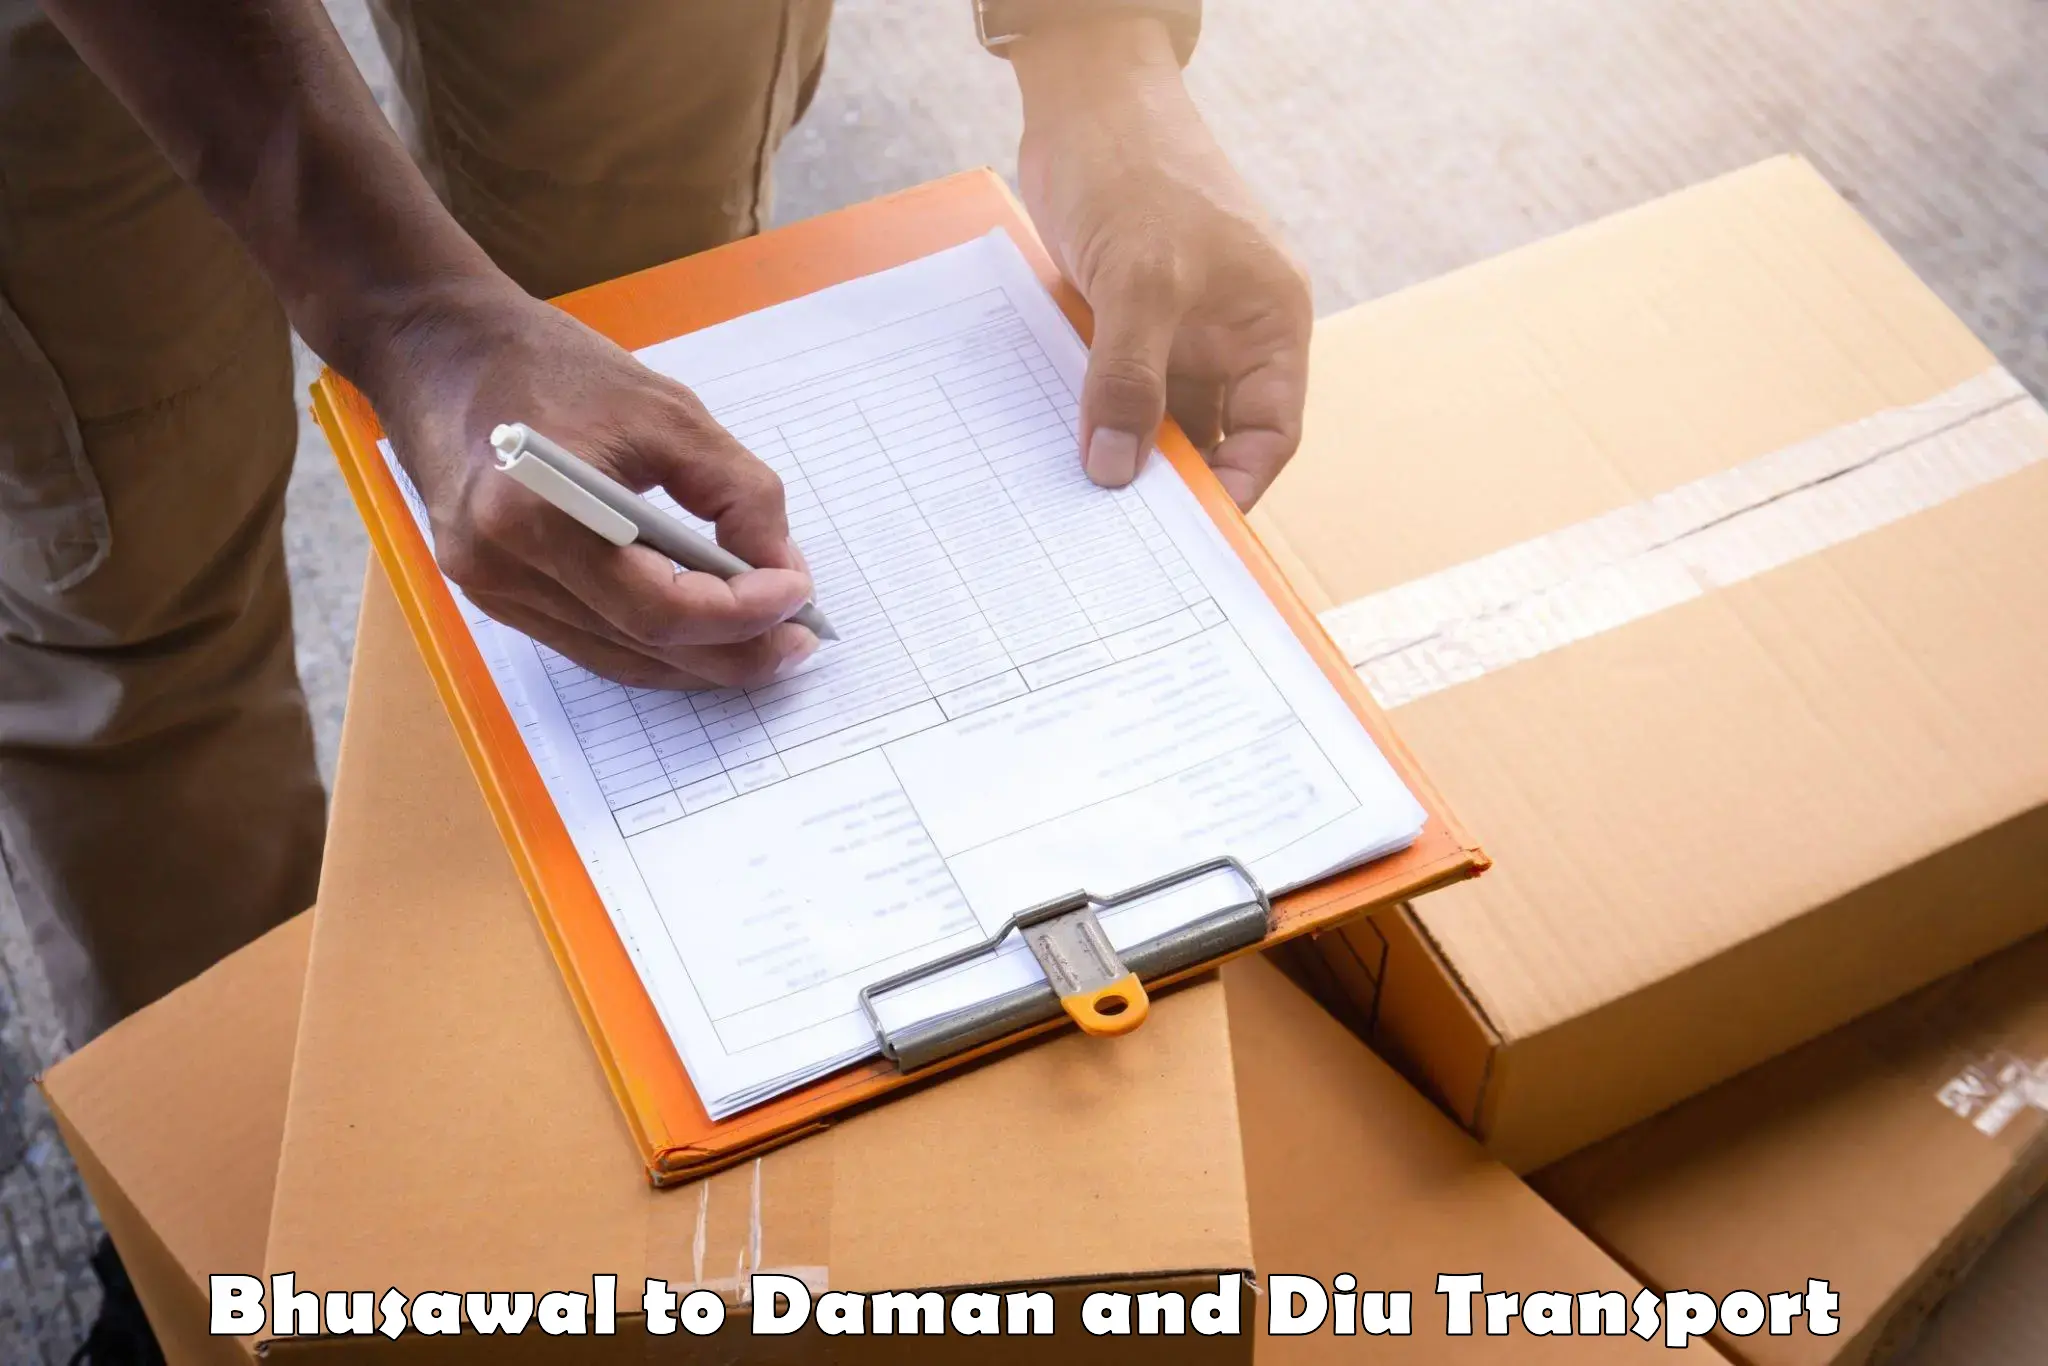 Delivery service Bhusawal to Daman